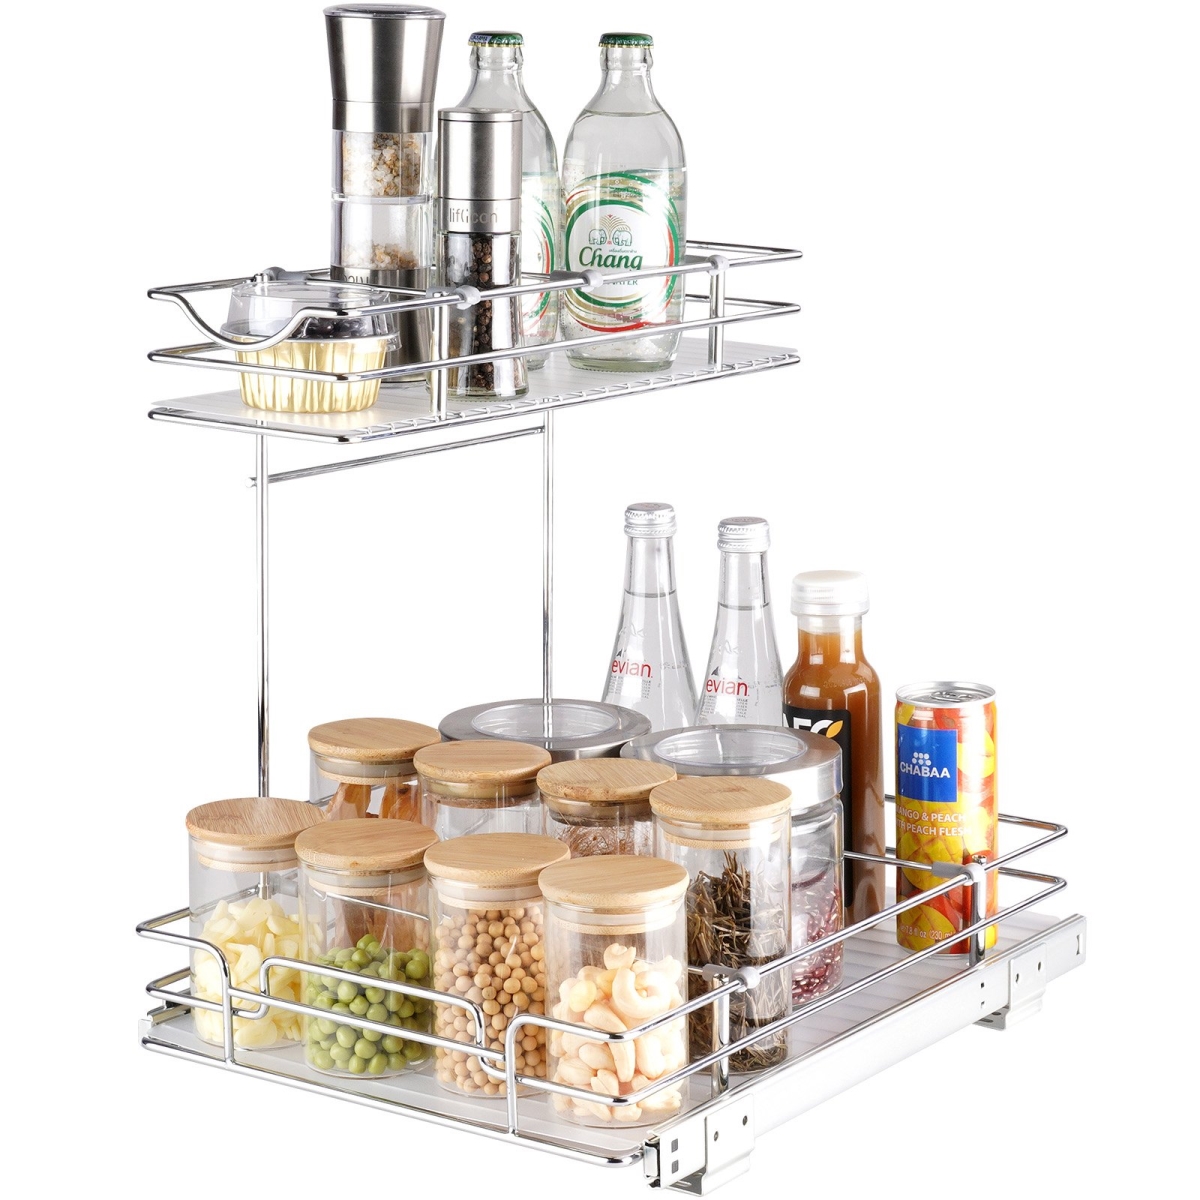 Picture of Vevor HGSLLHGSYCL21CL47V0 12 x 17 in. 2 Tier Pull Out Cabinet Organizer